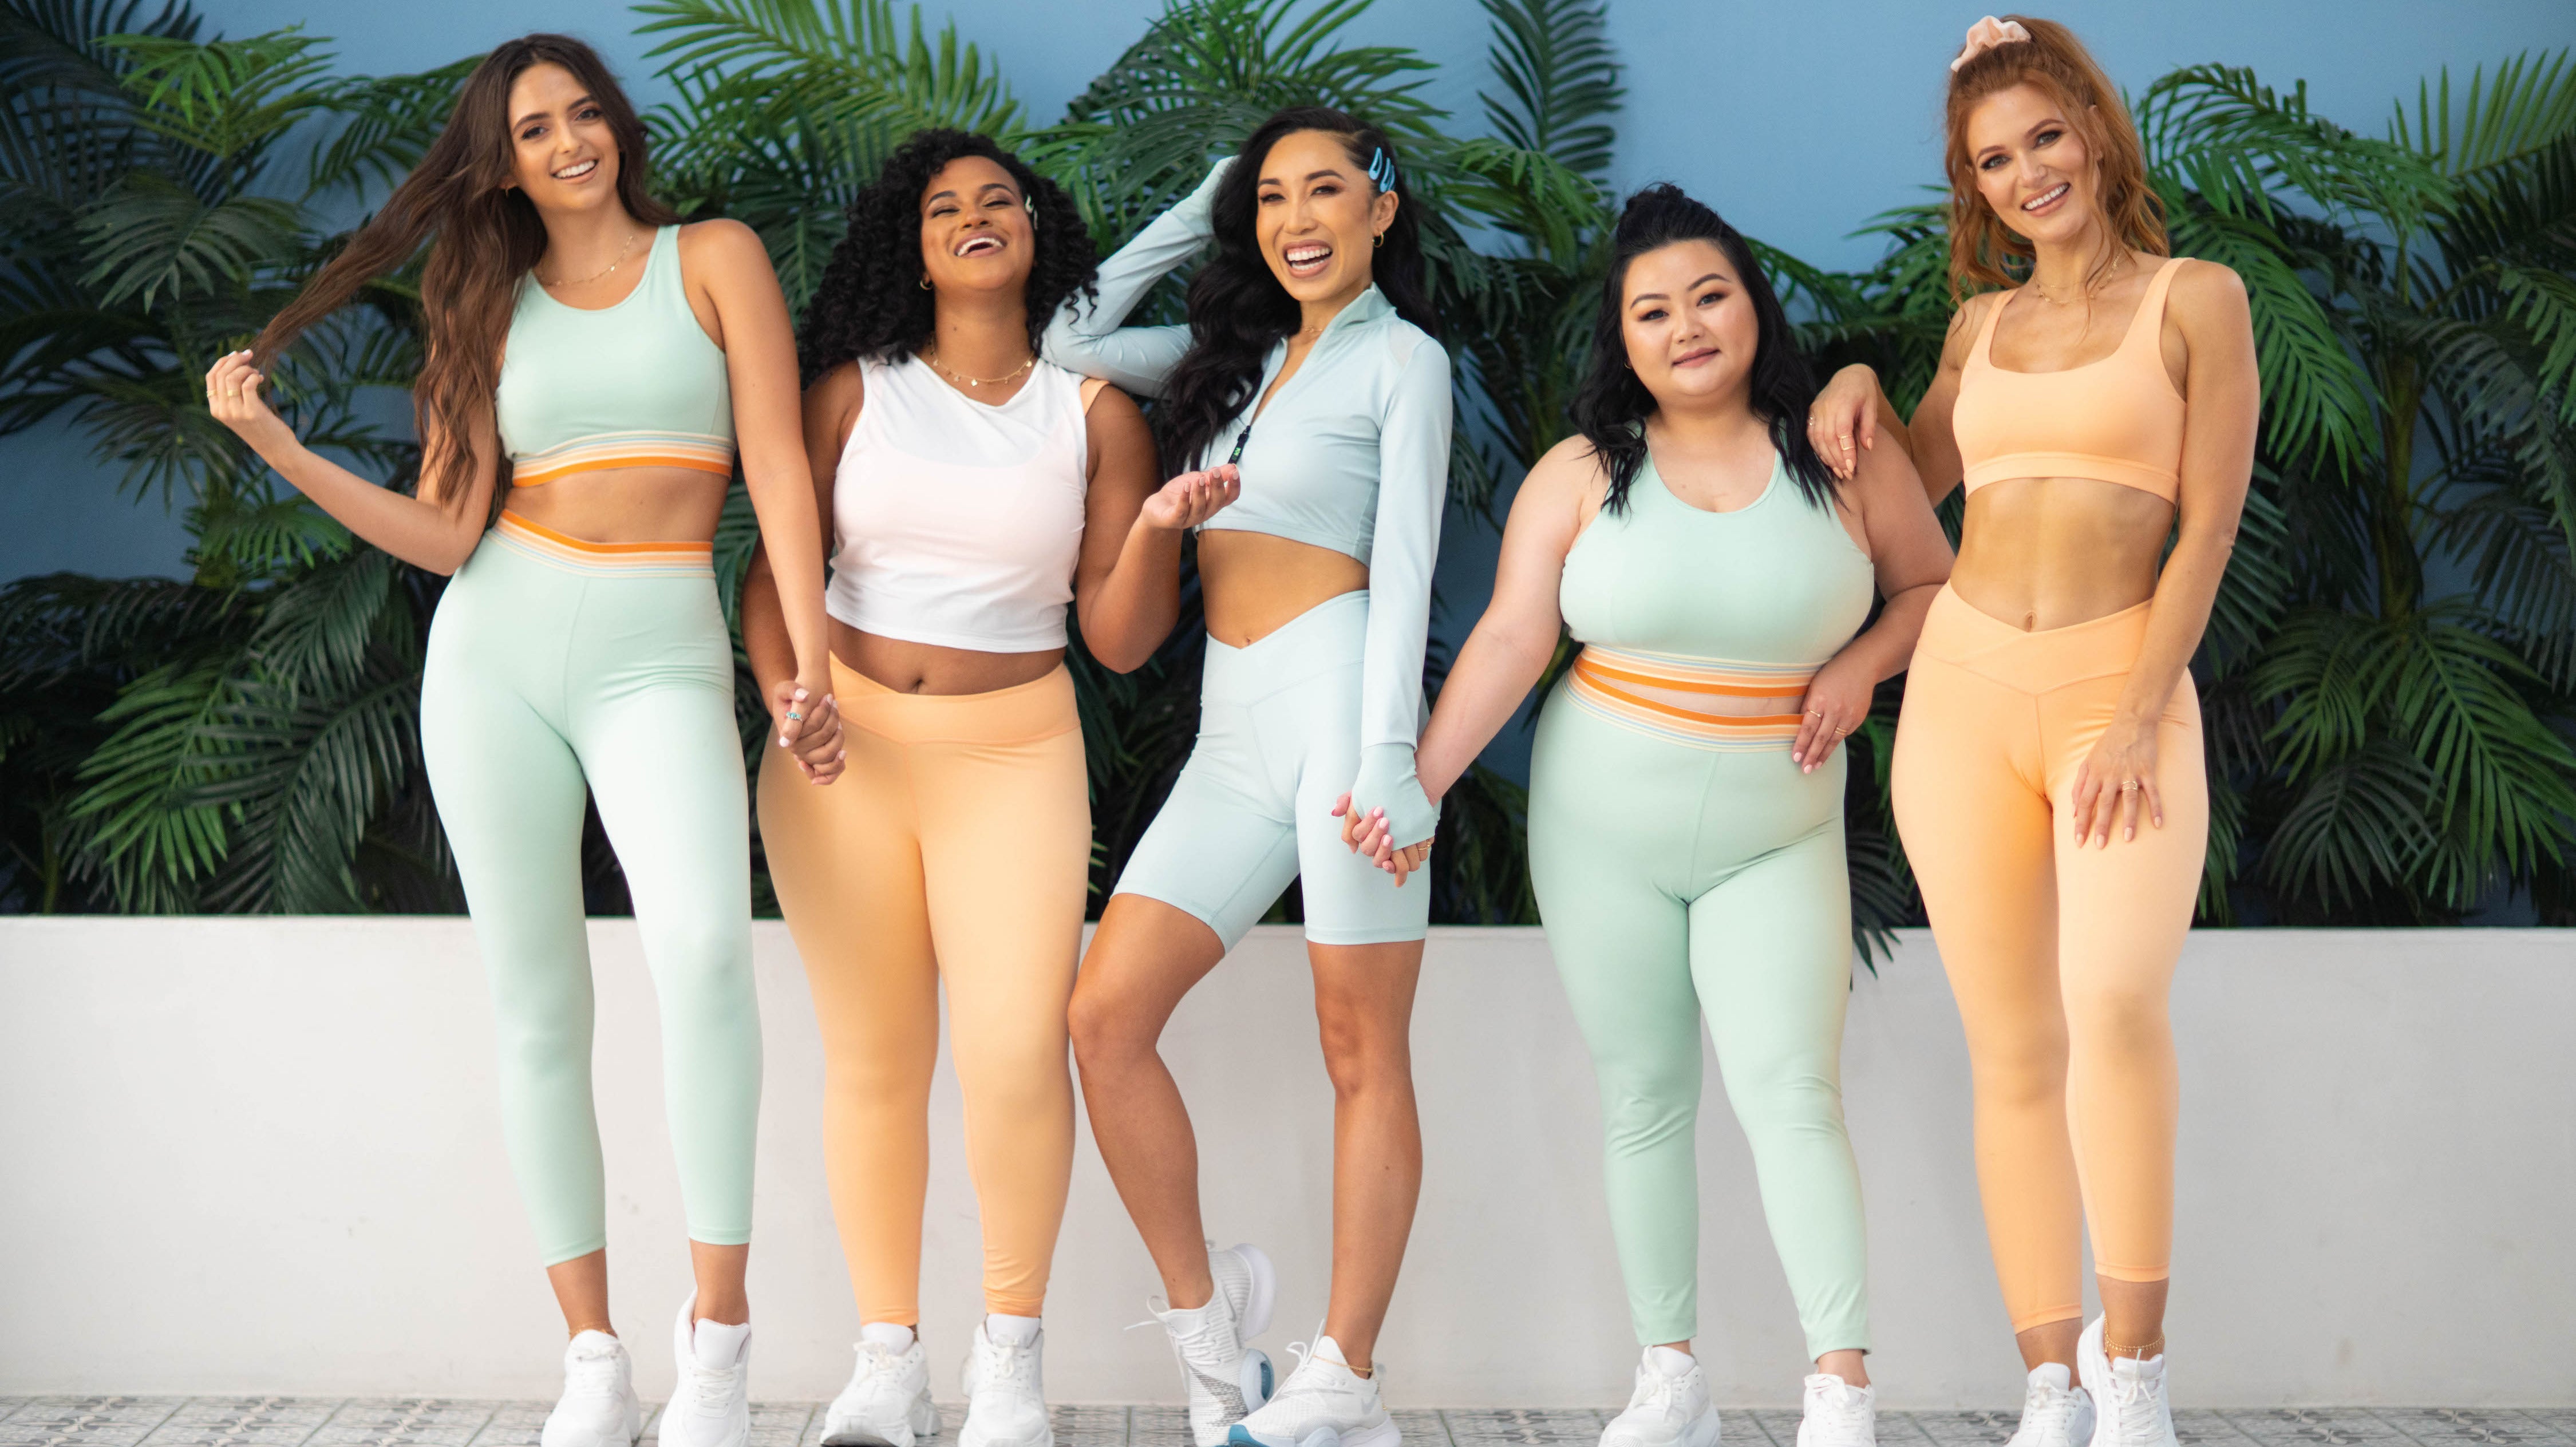 What size do you wear? - Blogilates